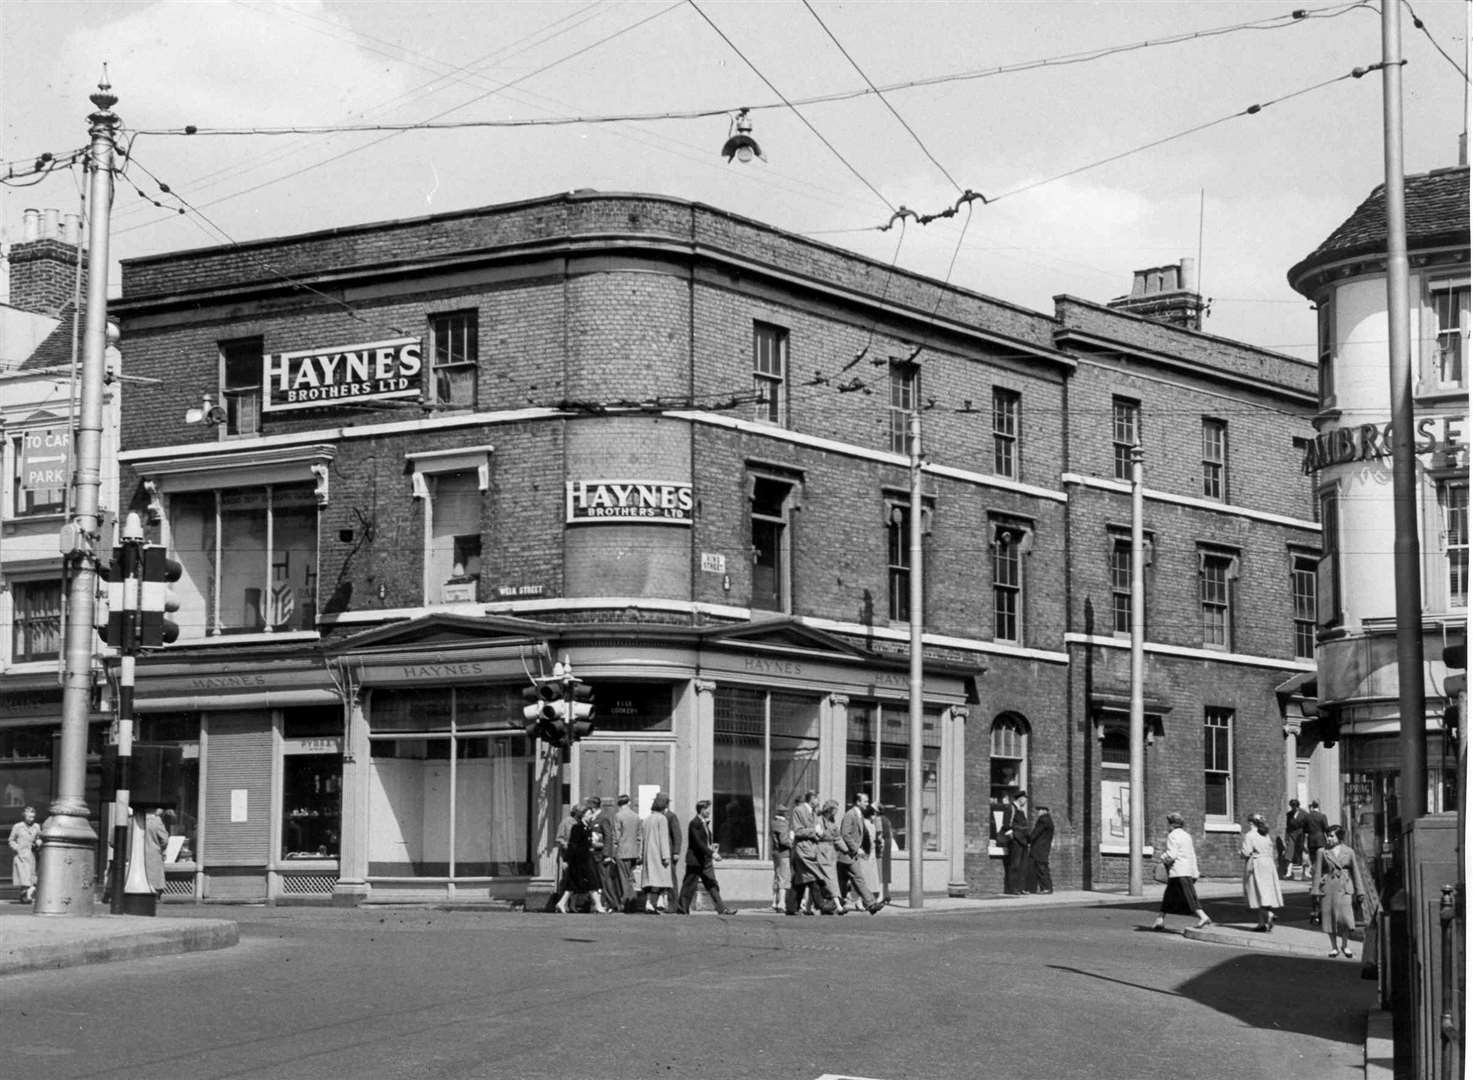 The Haynes Brothers premises was the key feature of the Week Street-King Street-Gabriels Hill-High Street junction in Maidstone in 1959